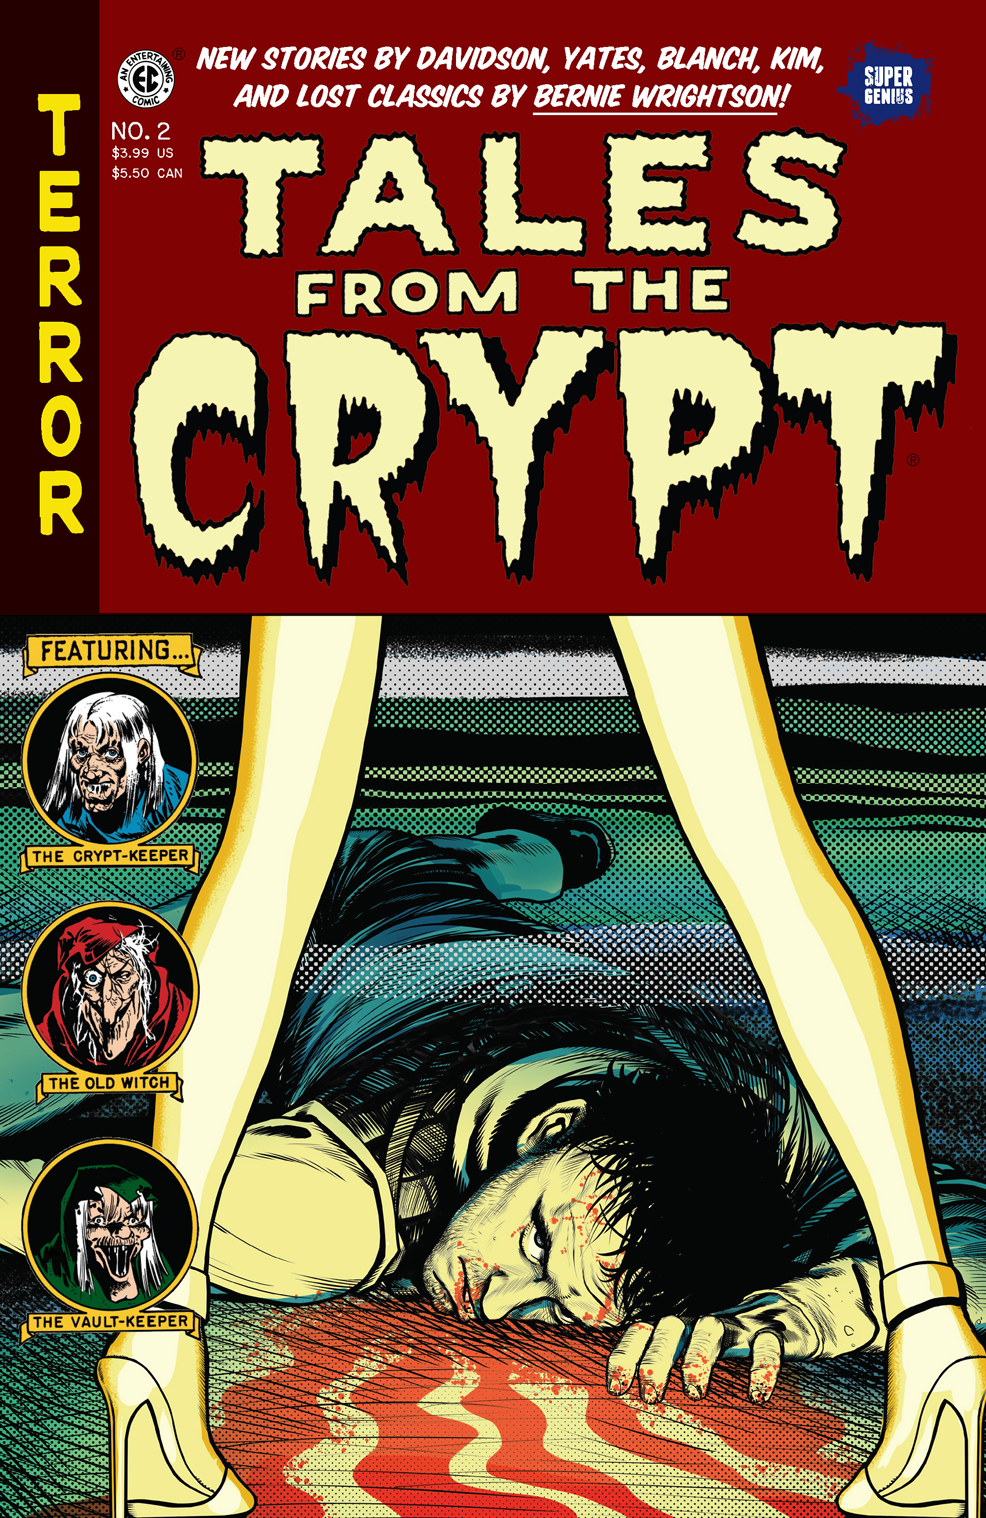 TALES FROM THE CRYPT #2